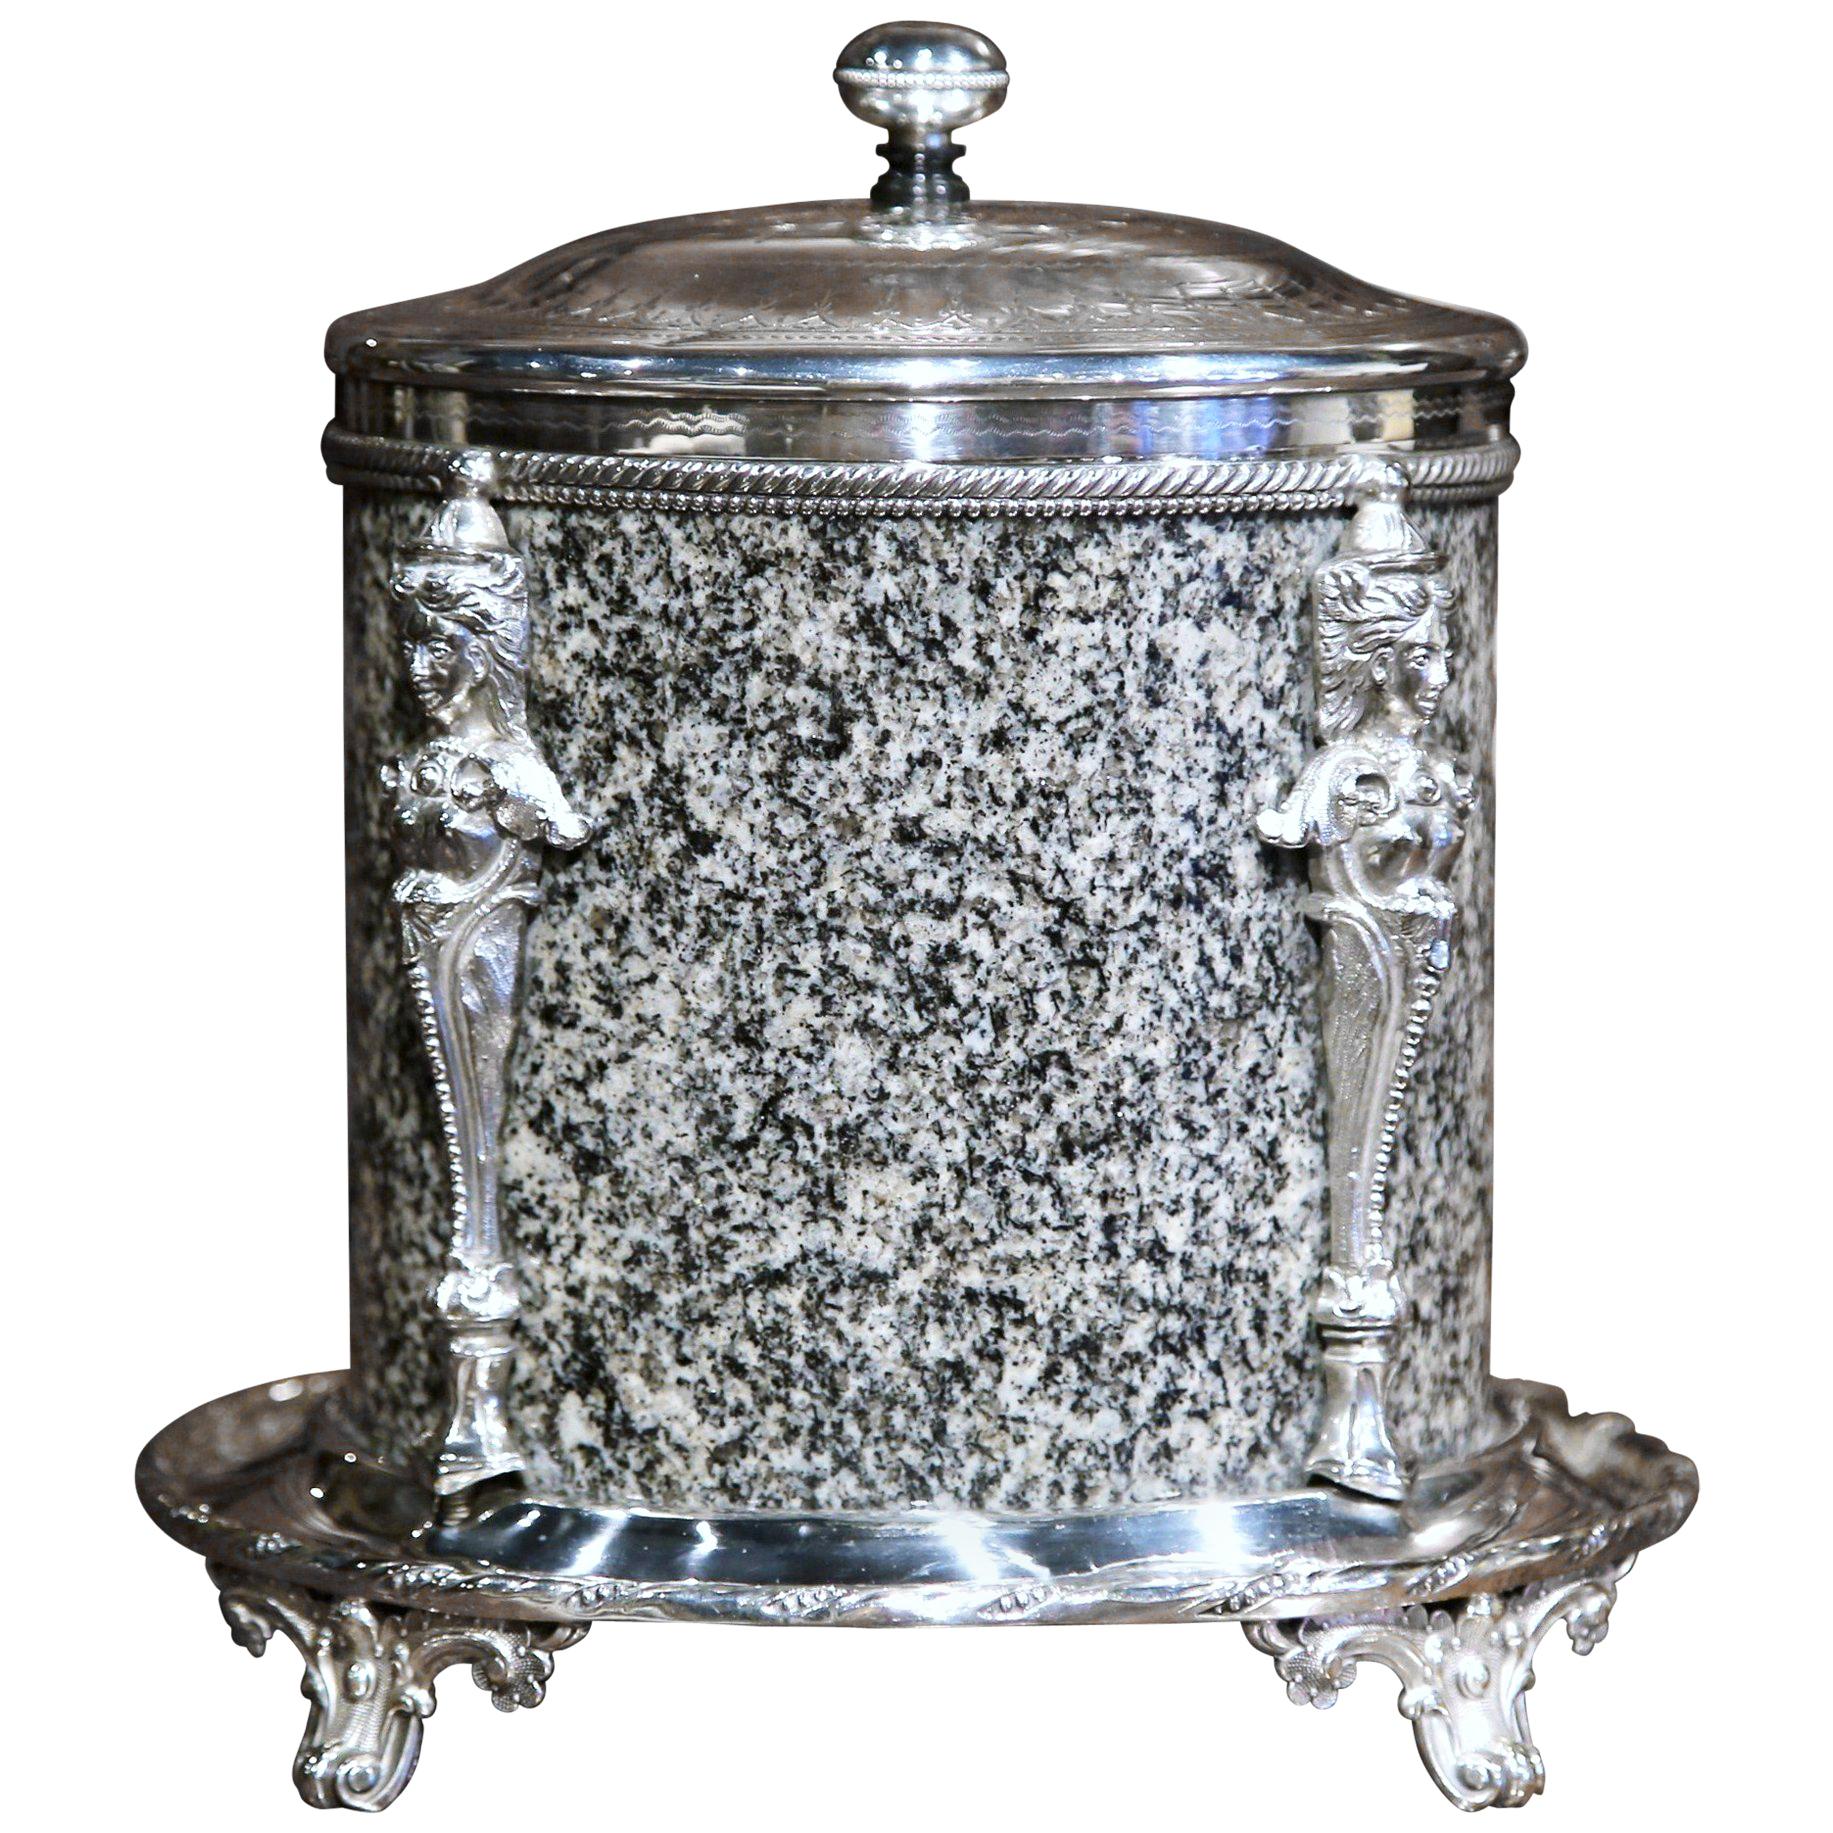 19th Century English Granite and Silver Plated Biscuit Box with Decorative Mount